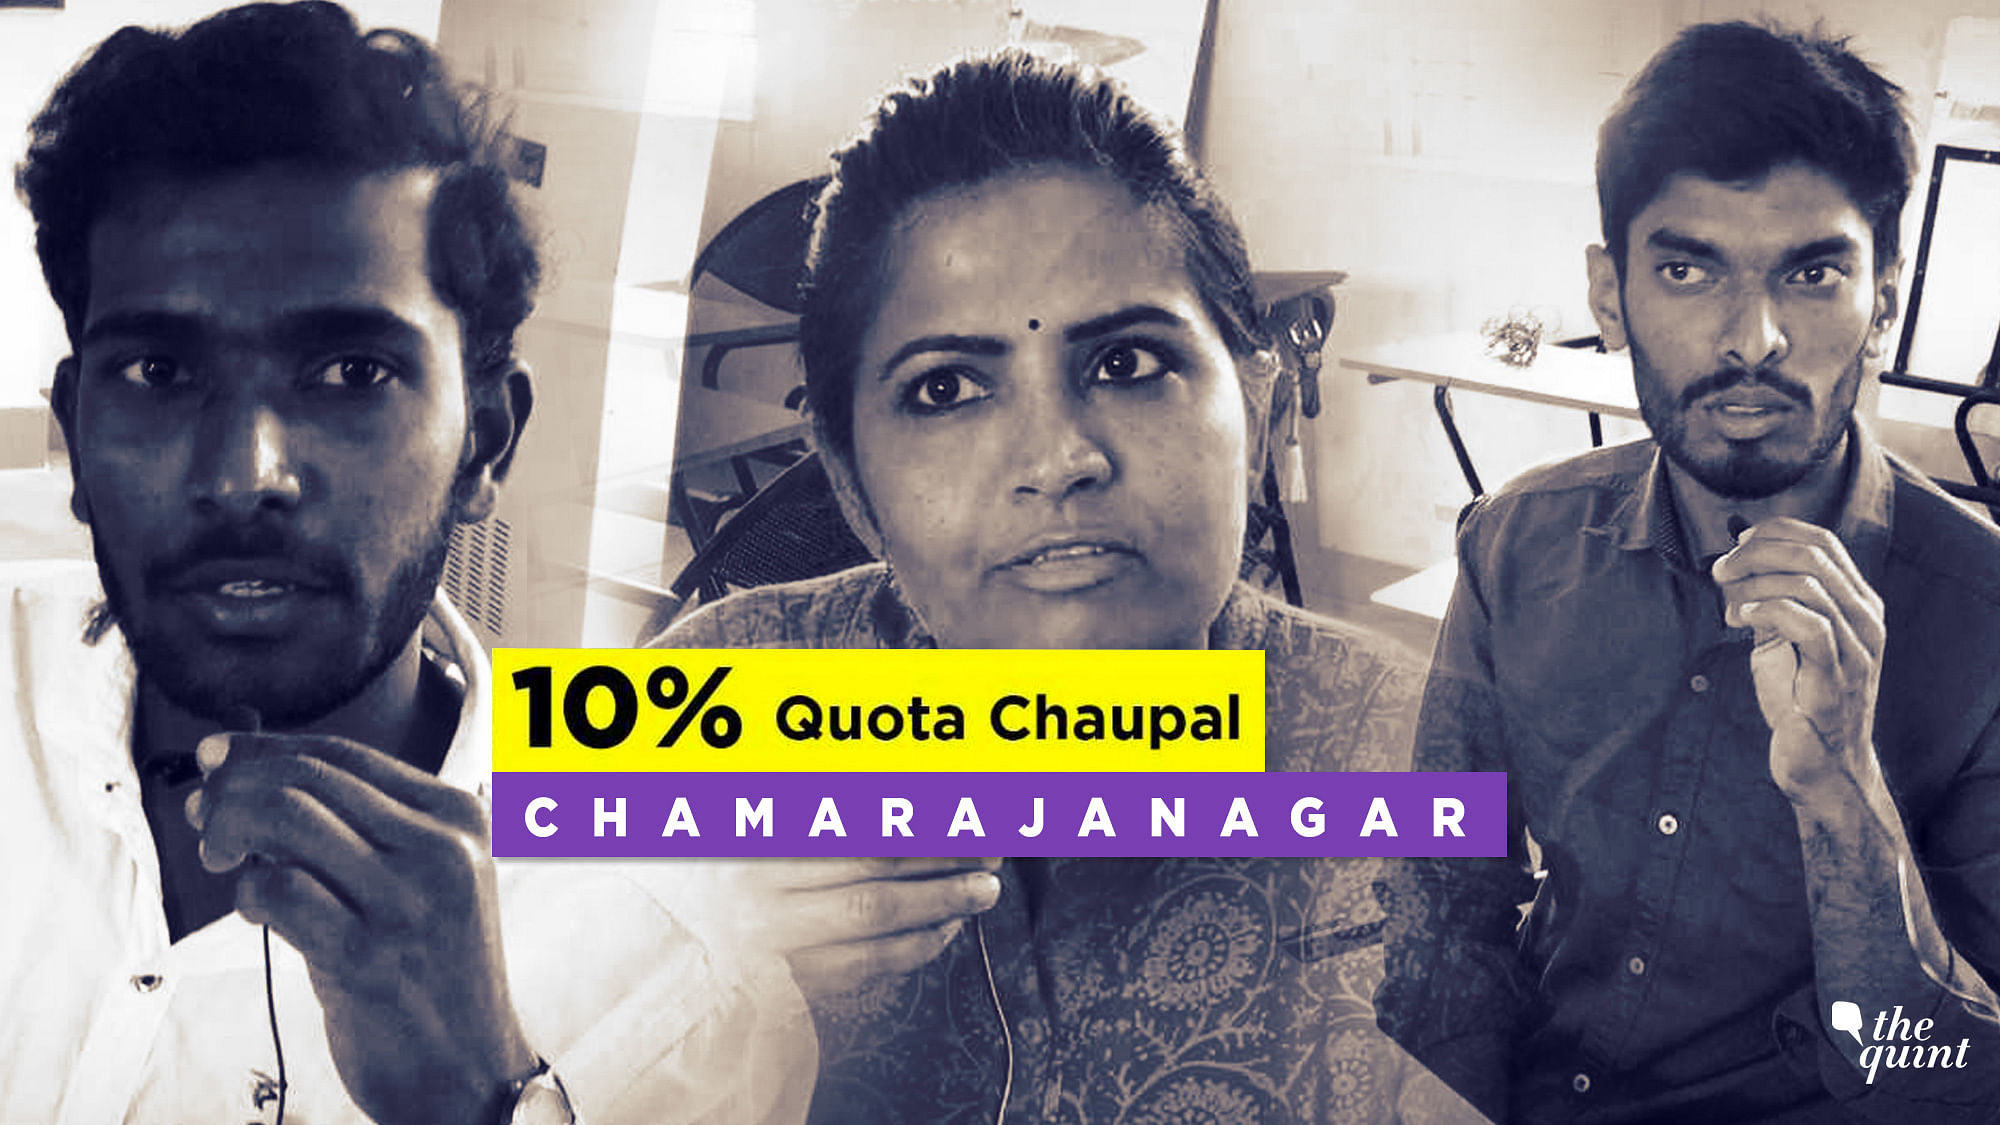 Chamarajanagar Chaupal: Youth speak out about the 10% quota for EWS in the general category.